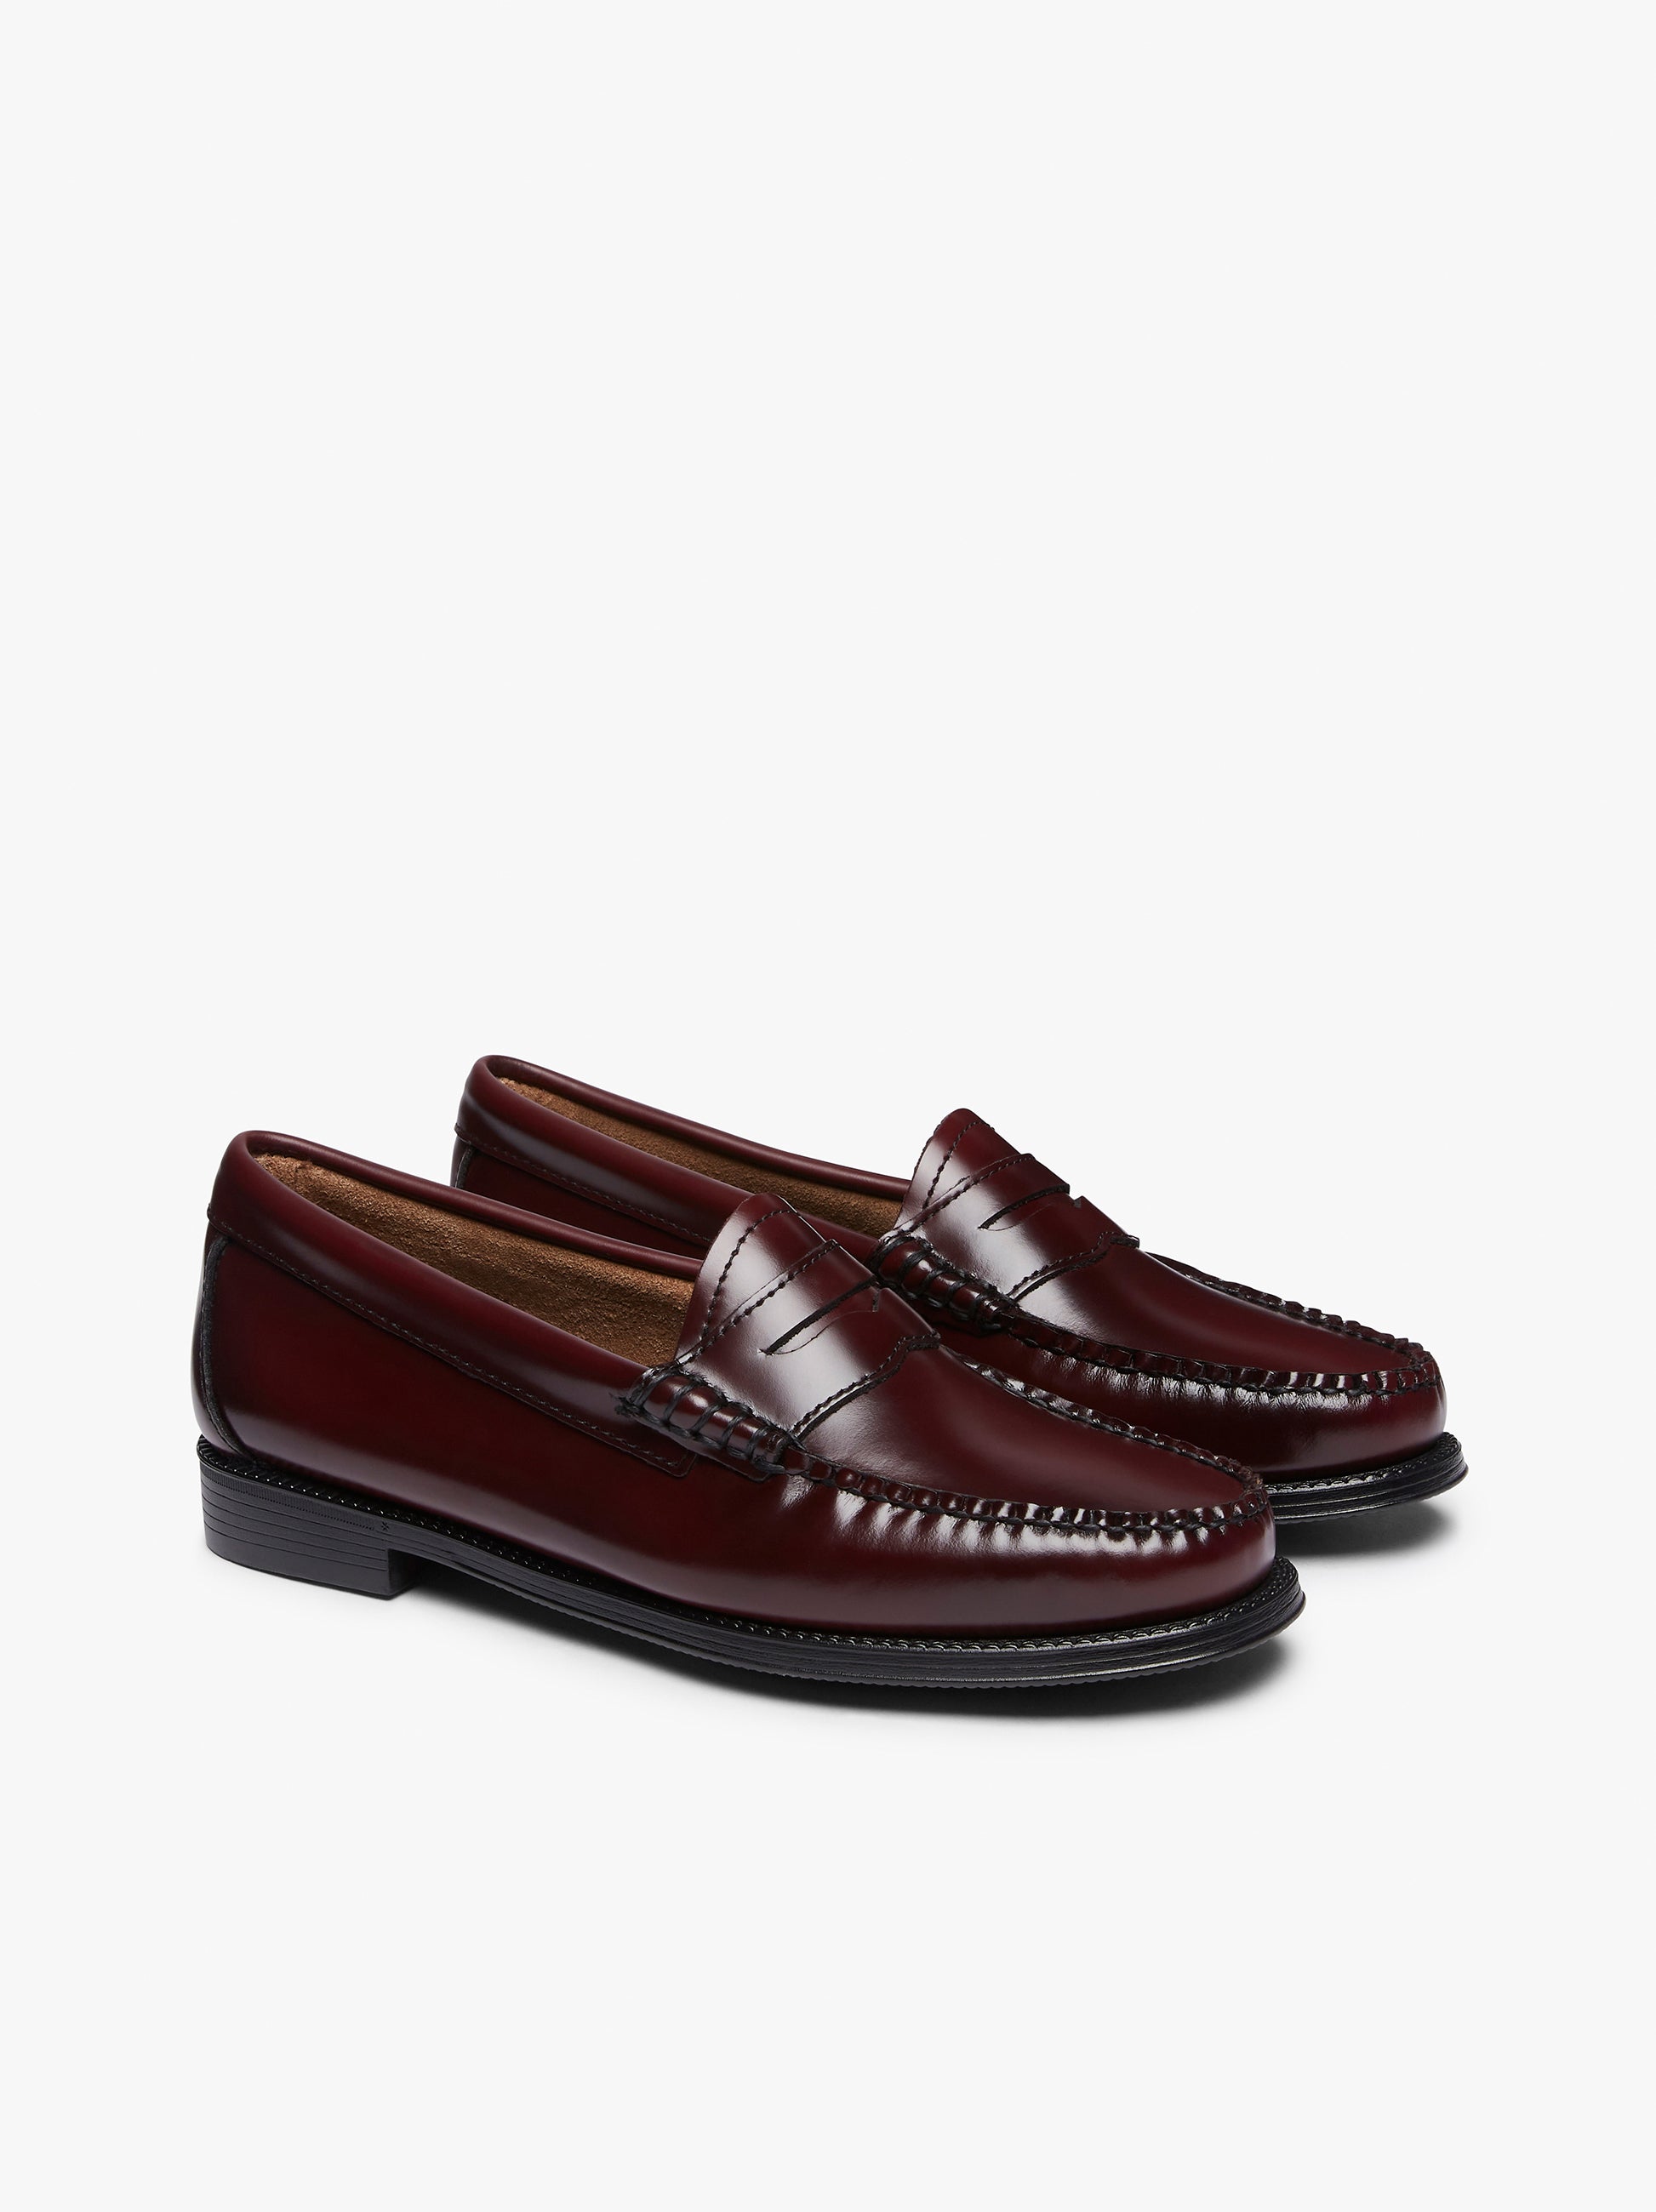 Wine Loafers | Wine Colour Loafers – G.H.BASS – G.H.BASS 1876